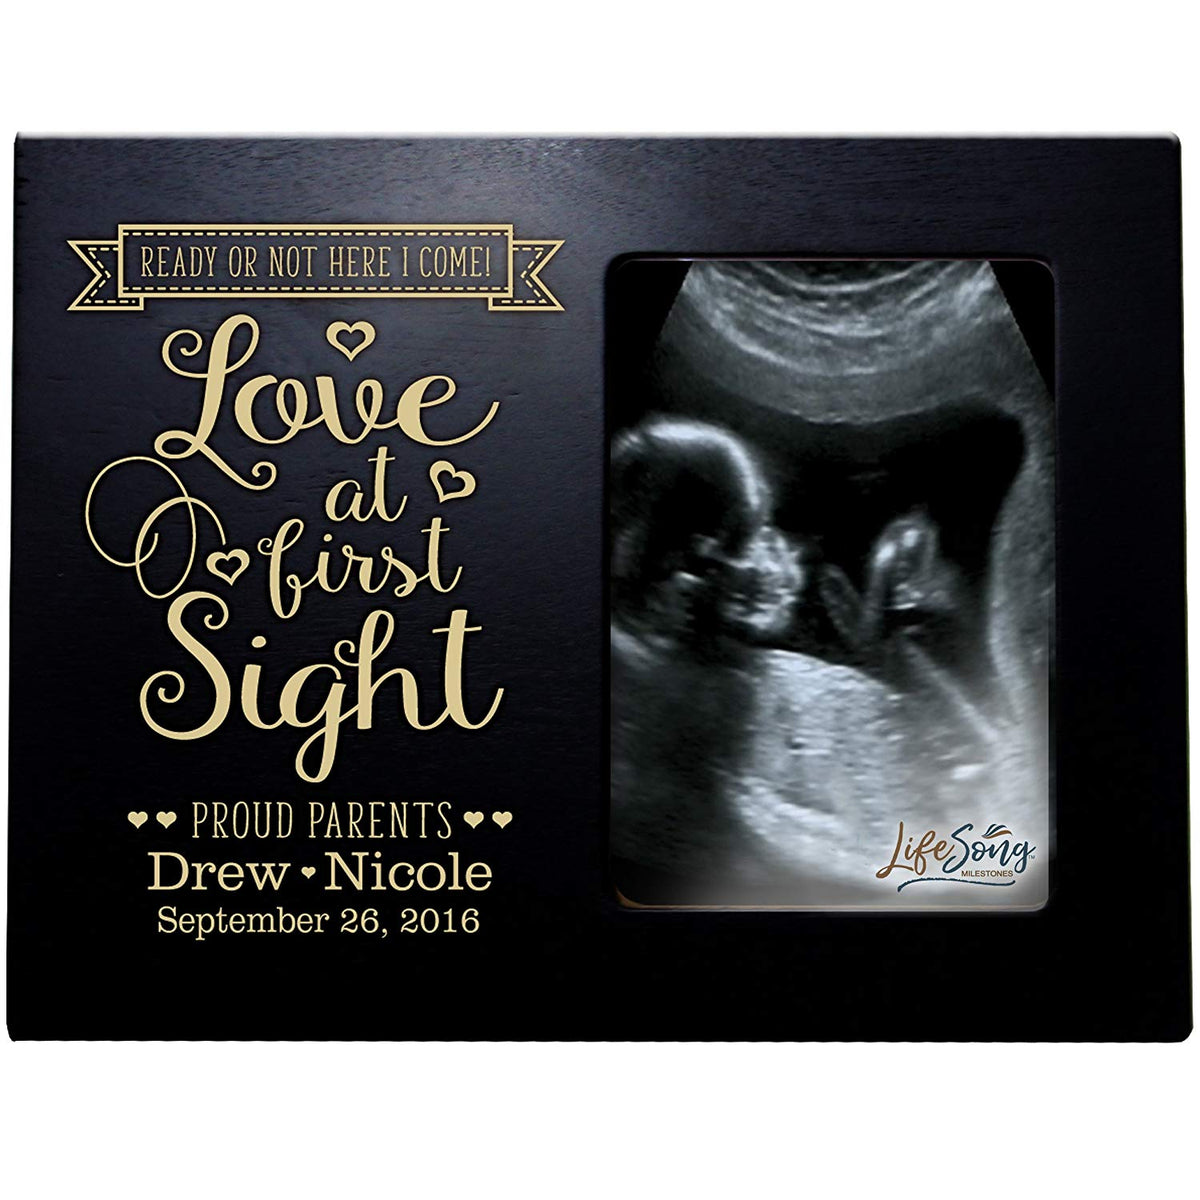 Personalized Baby Sonogram Picture Frame - Love At First Sight - LifeSong Milestones